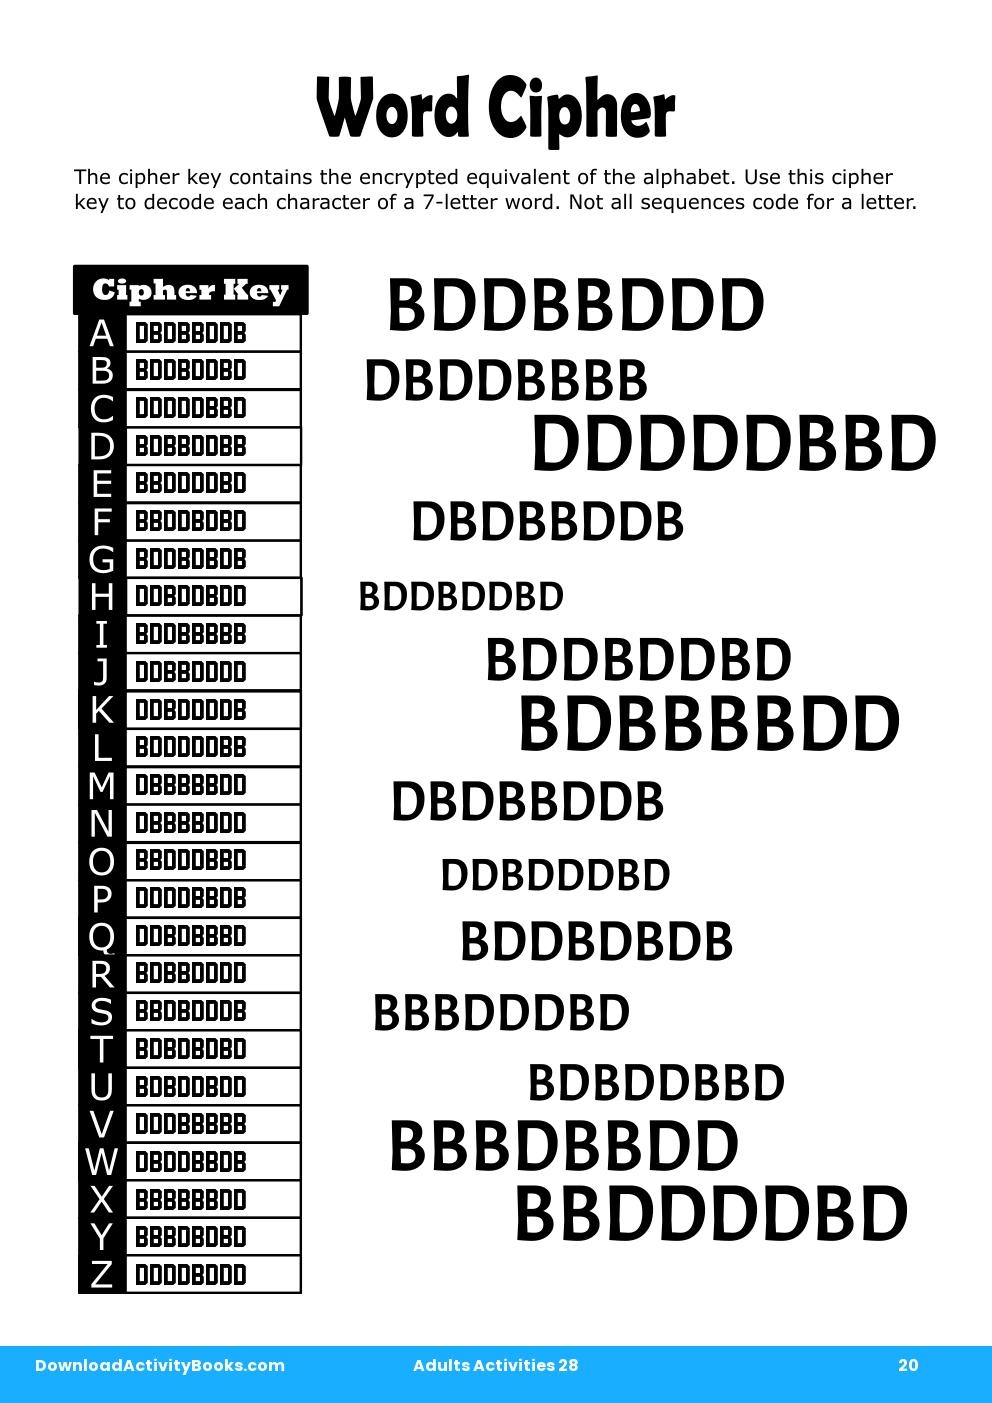 Word Cipher in Adults Activities 28